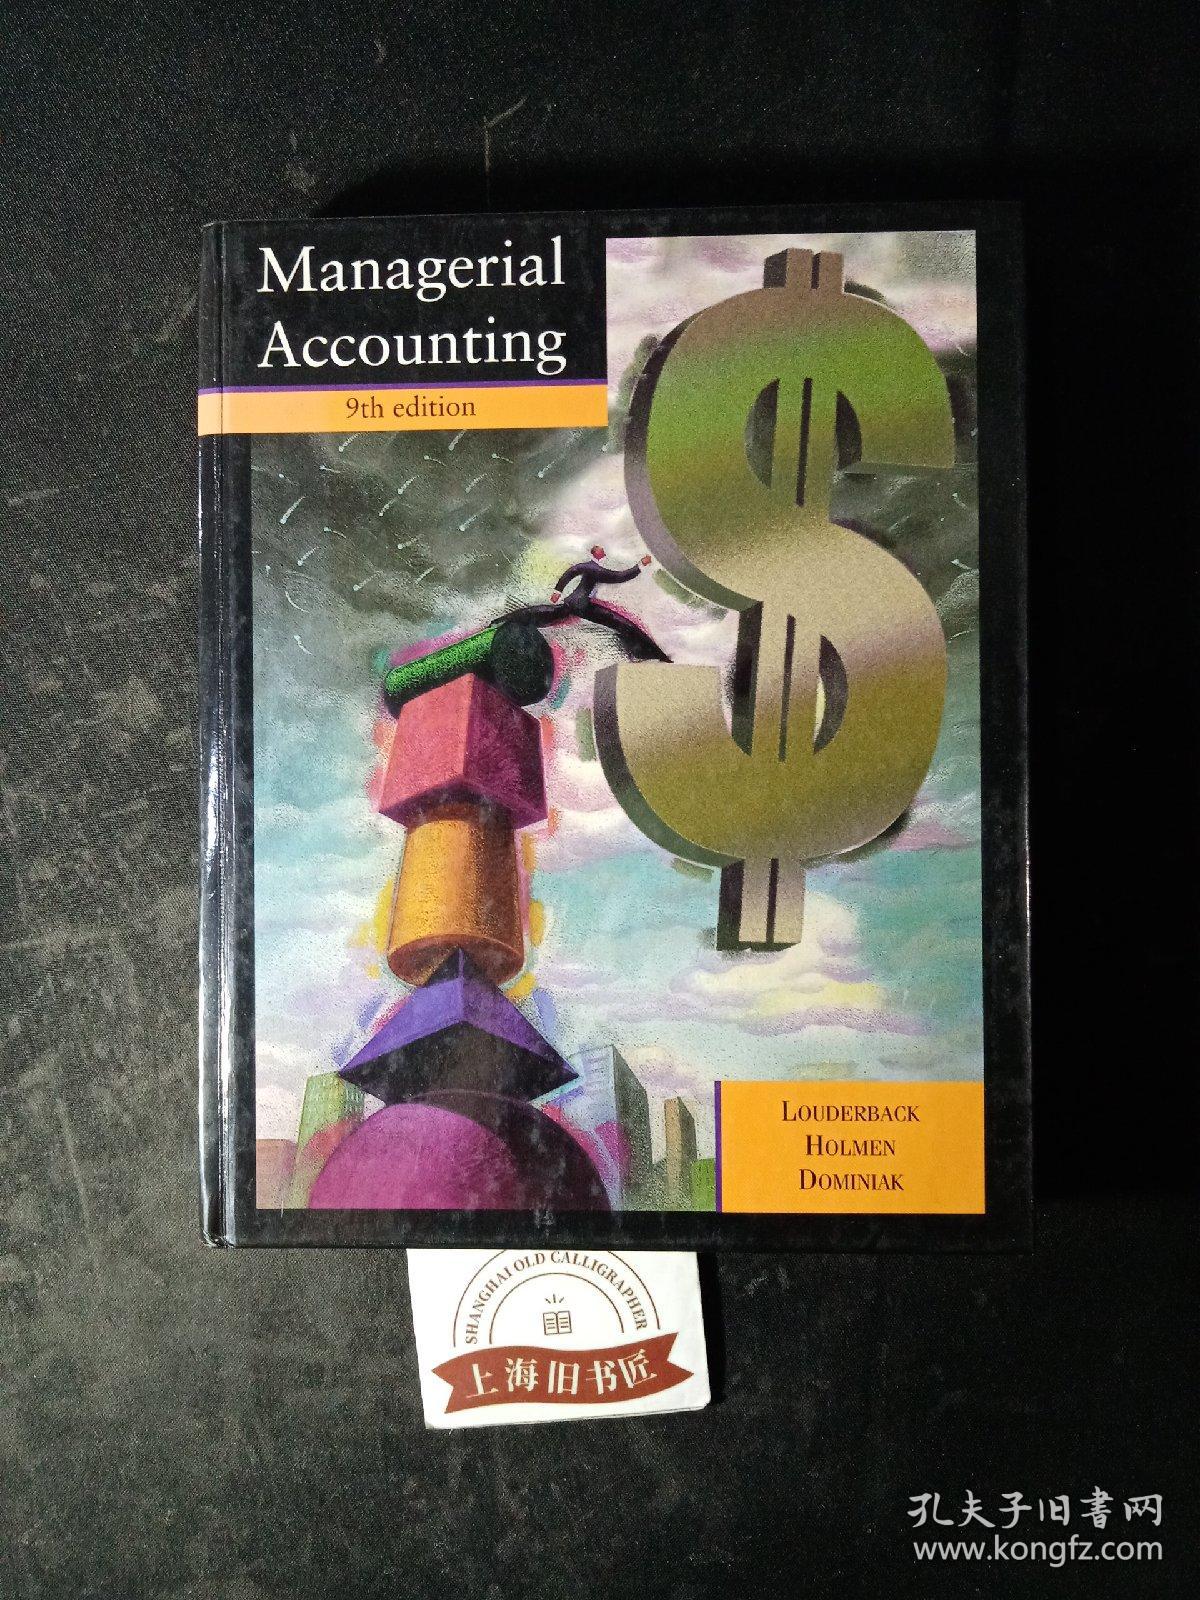 Managerial Accounting(9th edition)精装